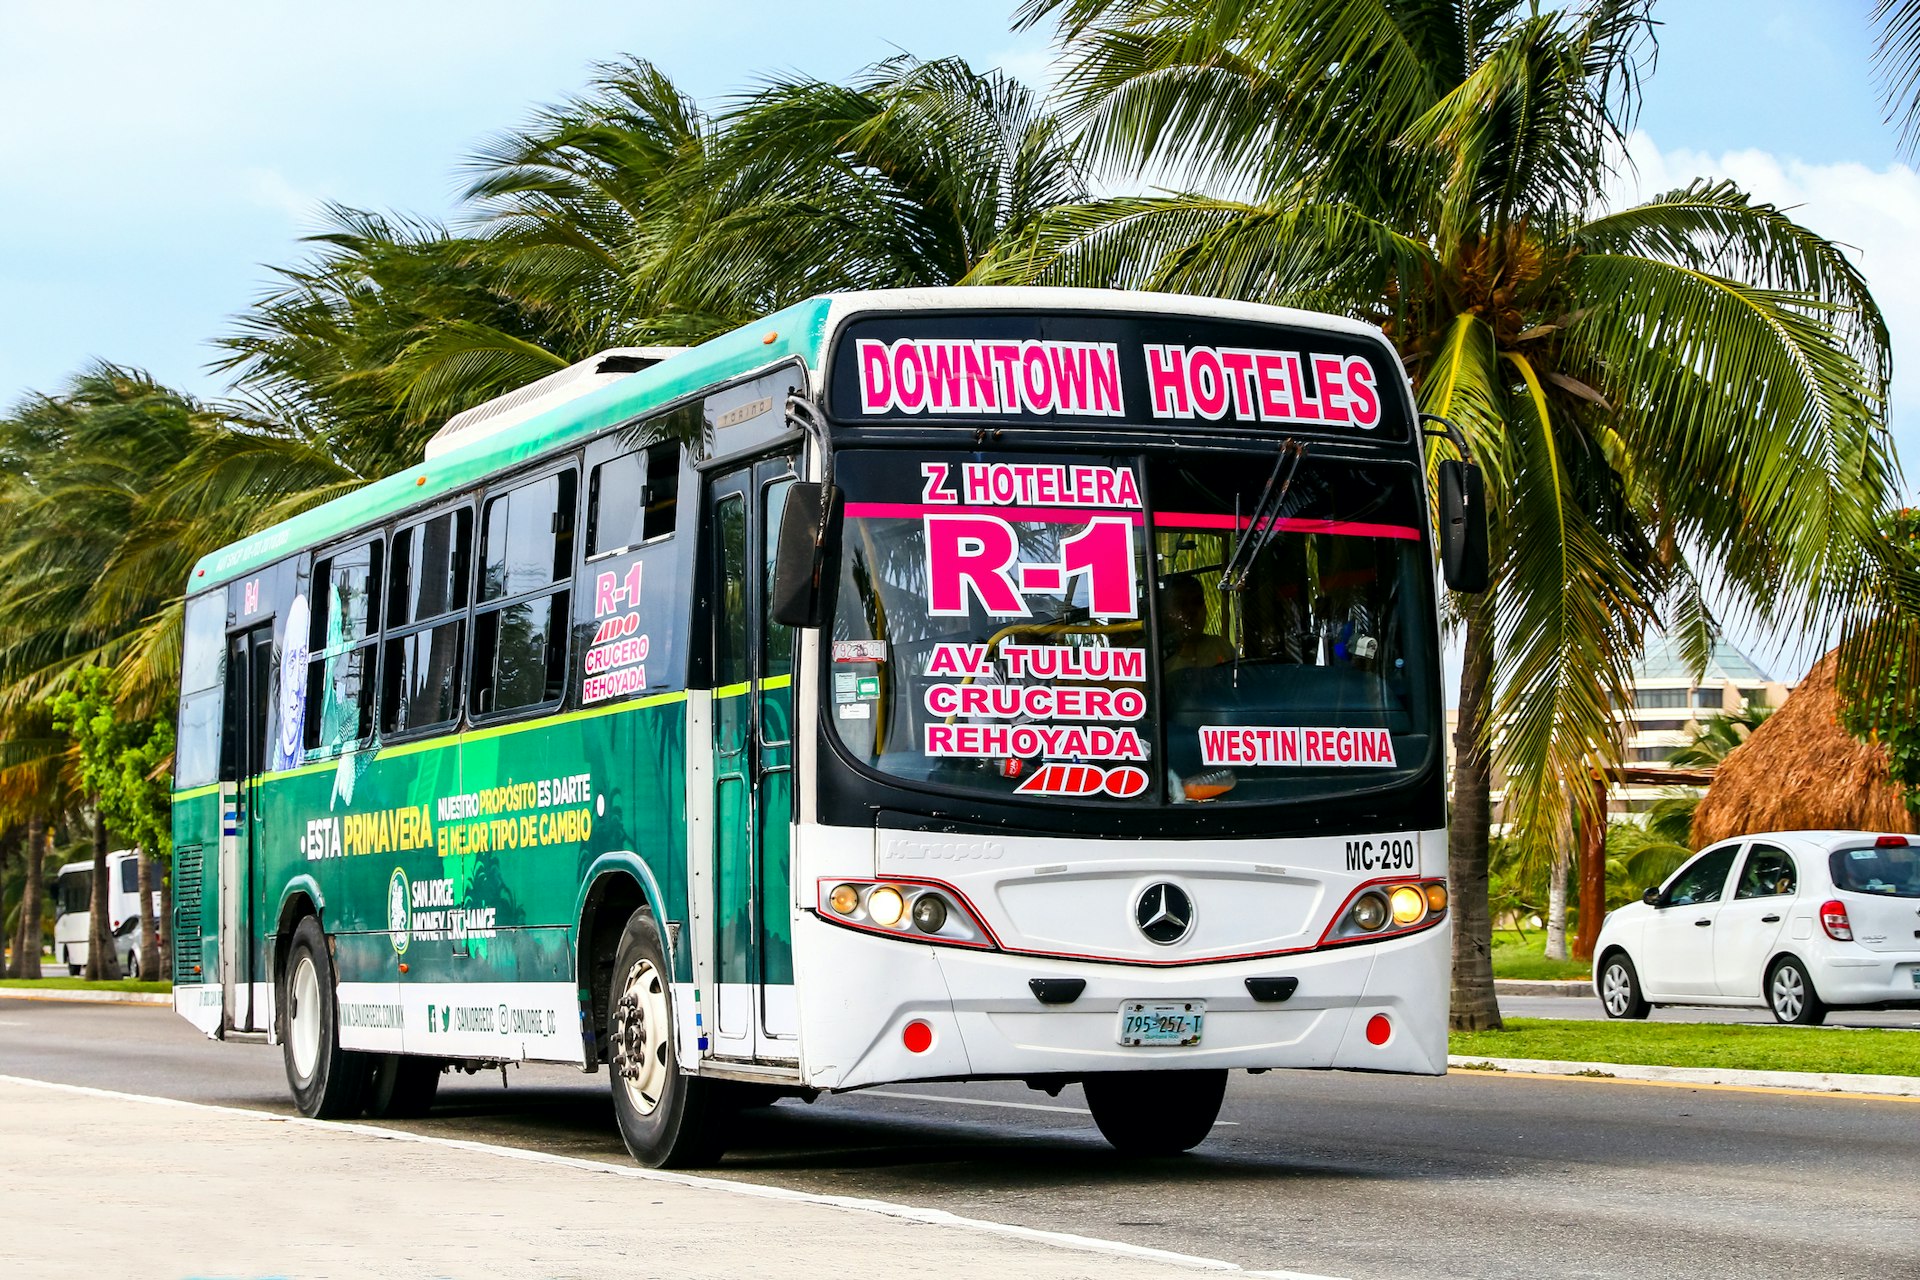 A local bus driving along the street in Cancún, Mexico